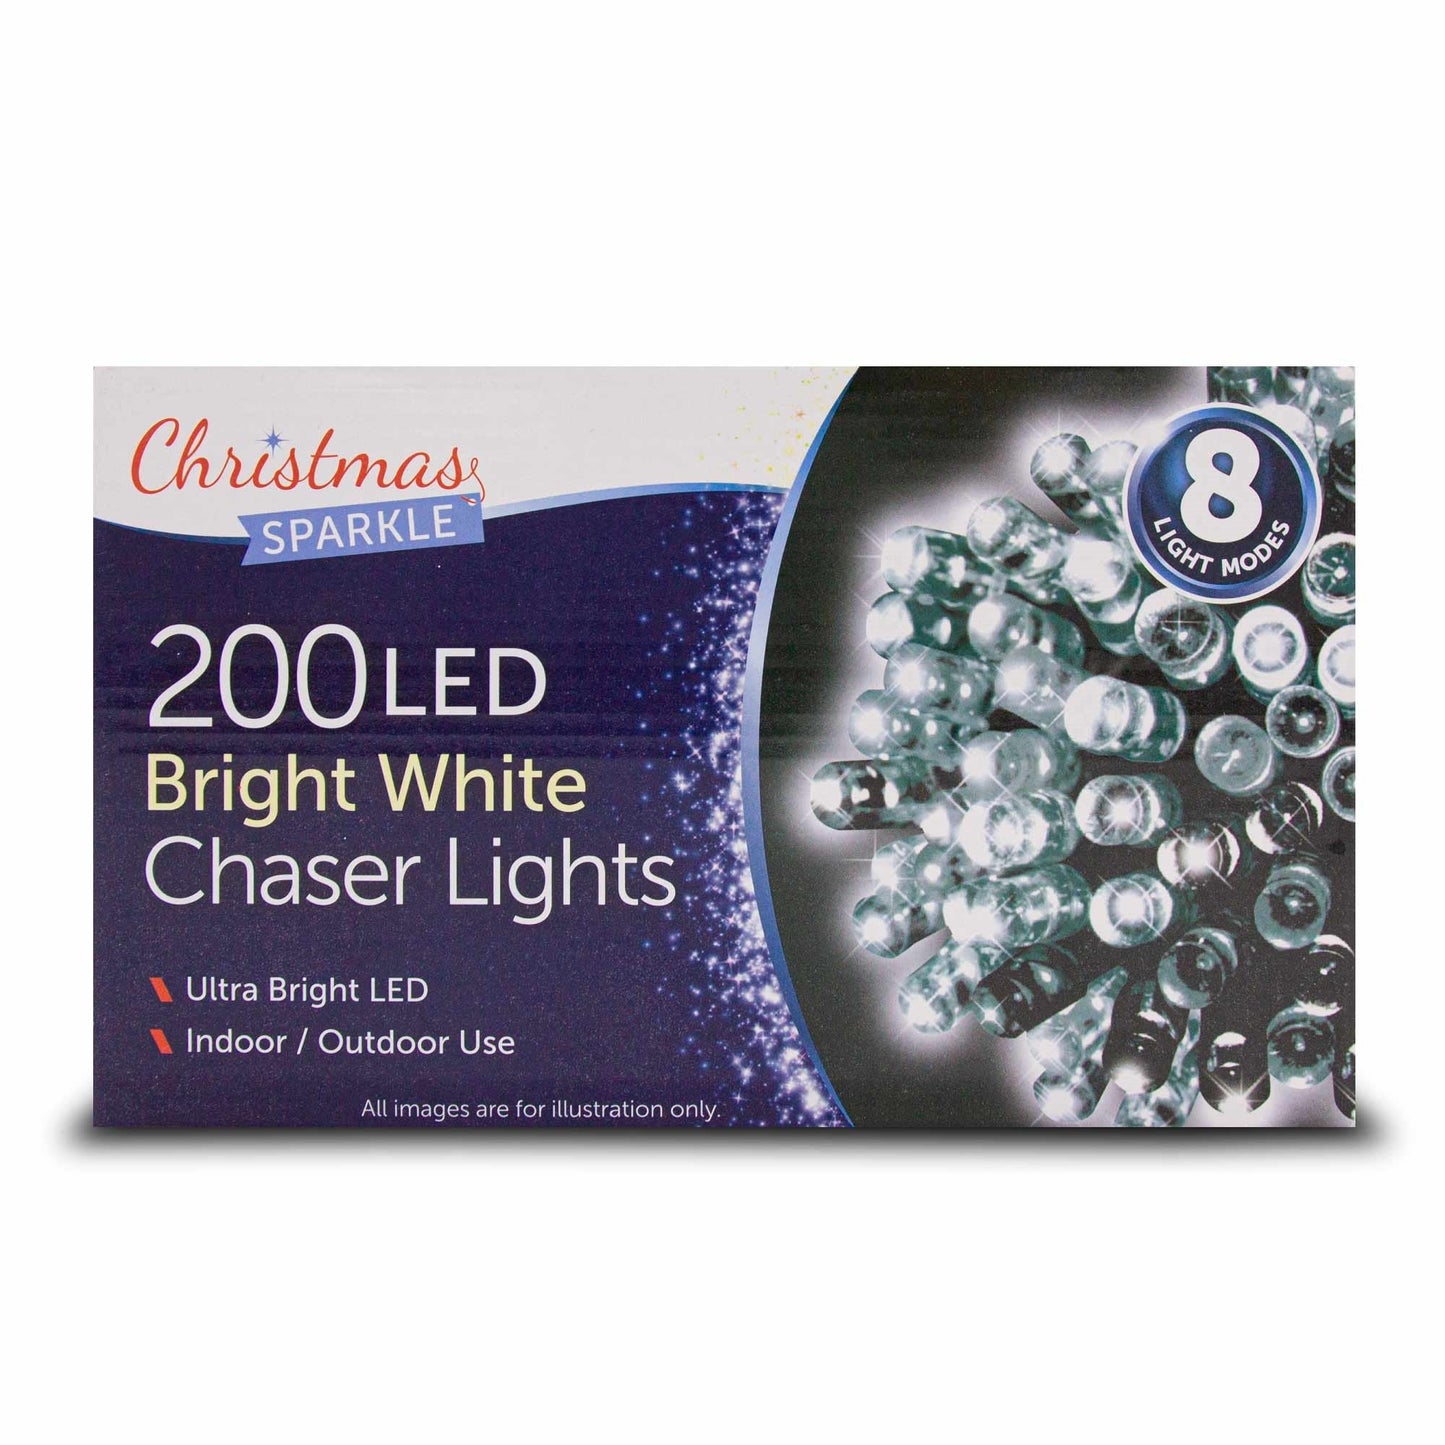 Christmas Sparkle Indoor and Outdoor Chaser Lights x 200 White LEDs - Mains Operated